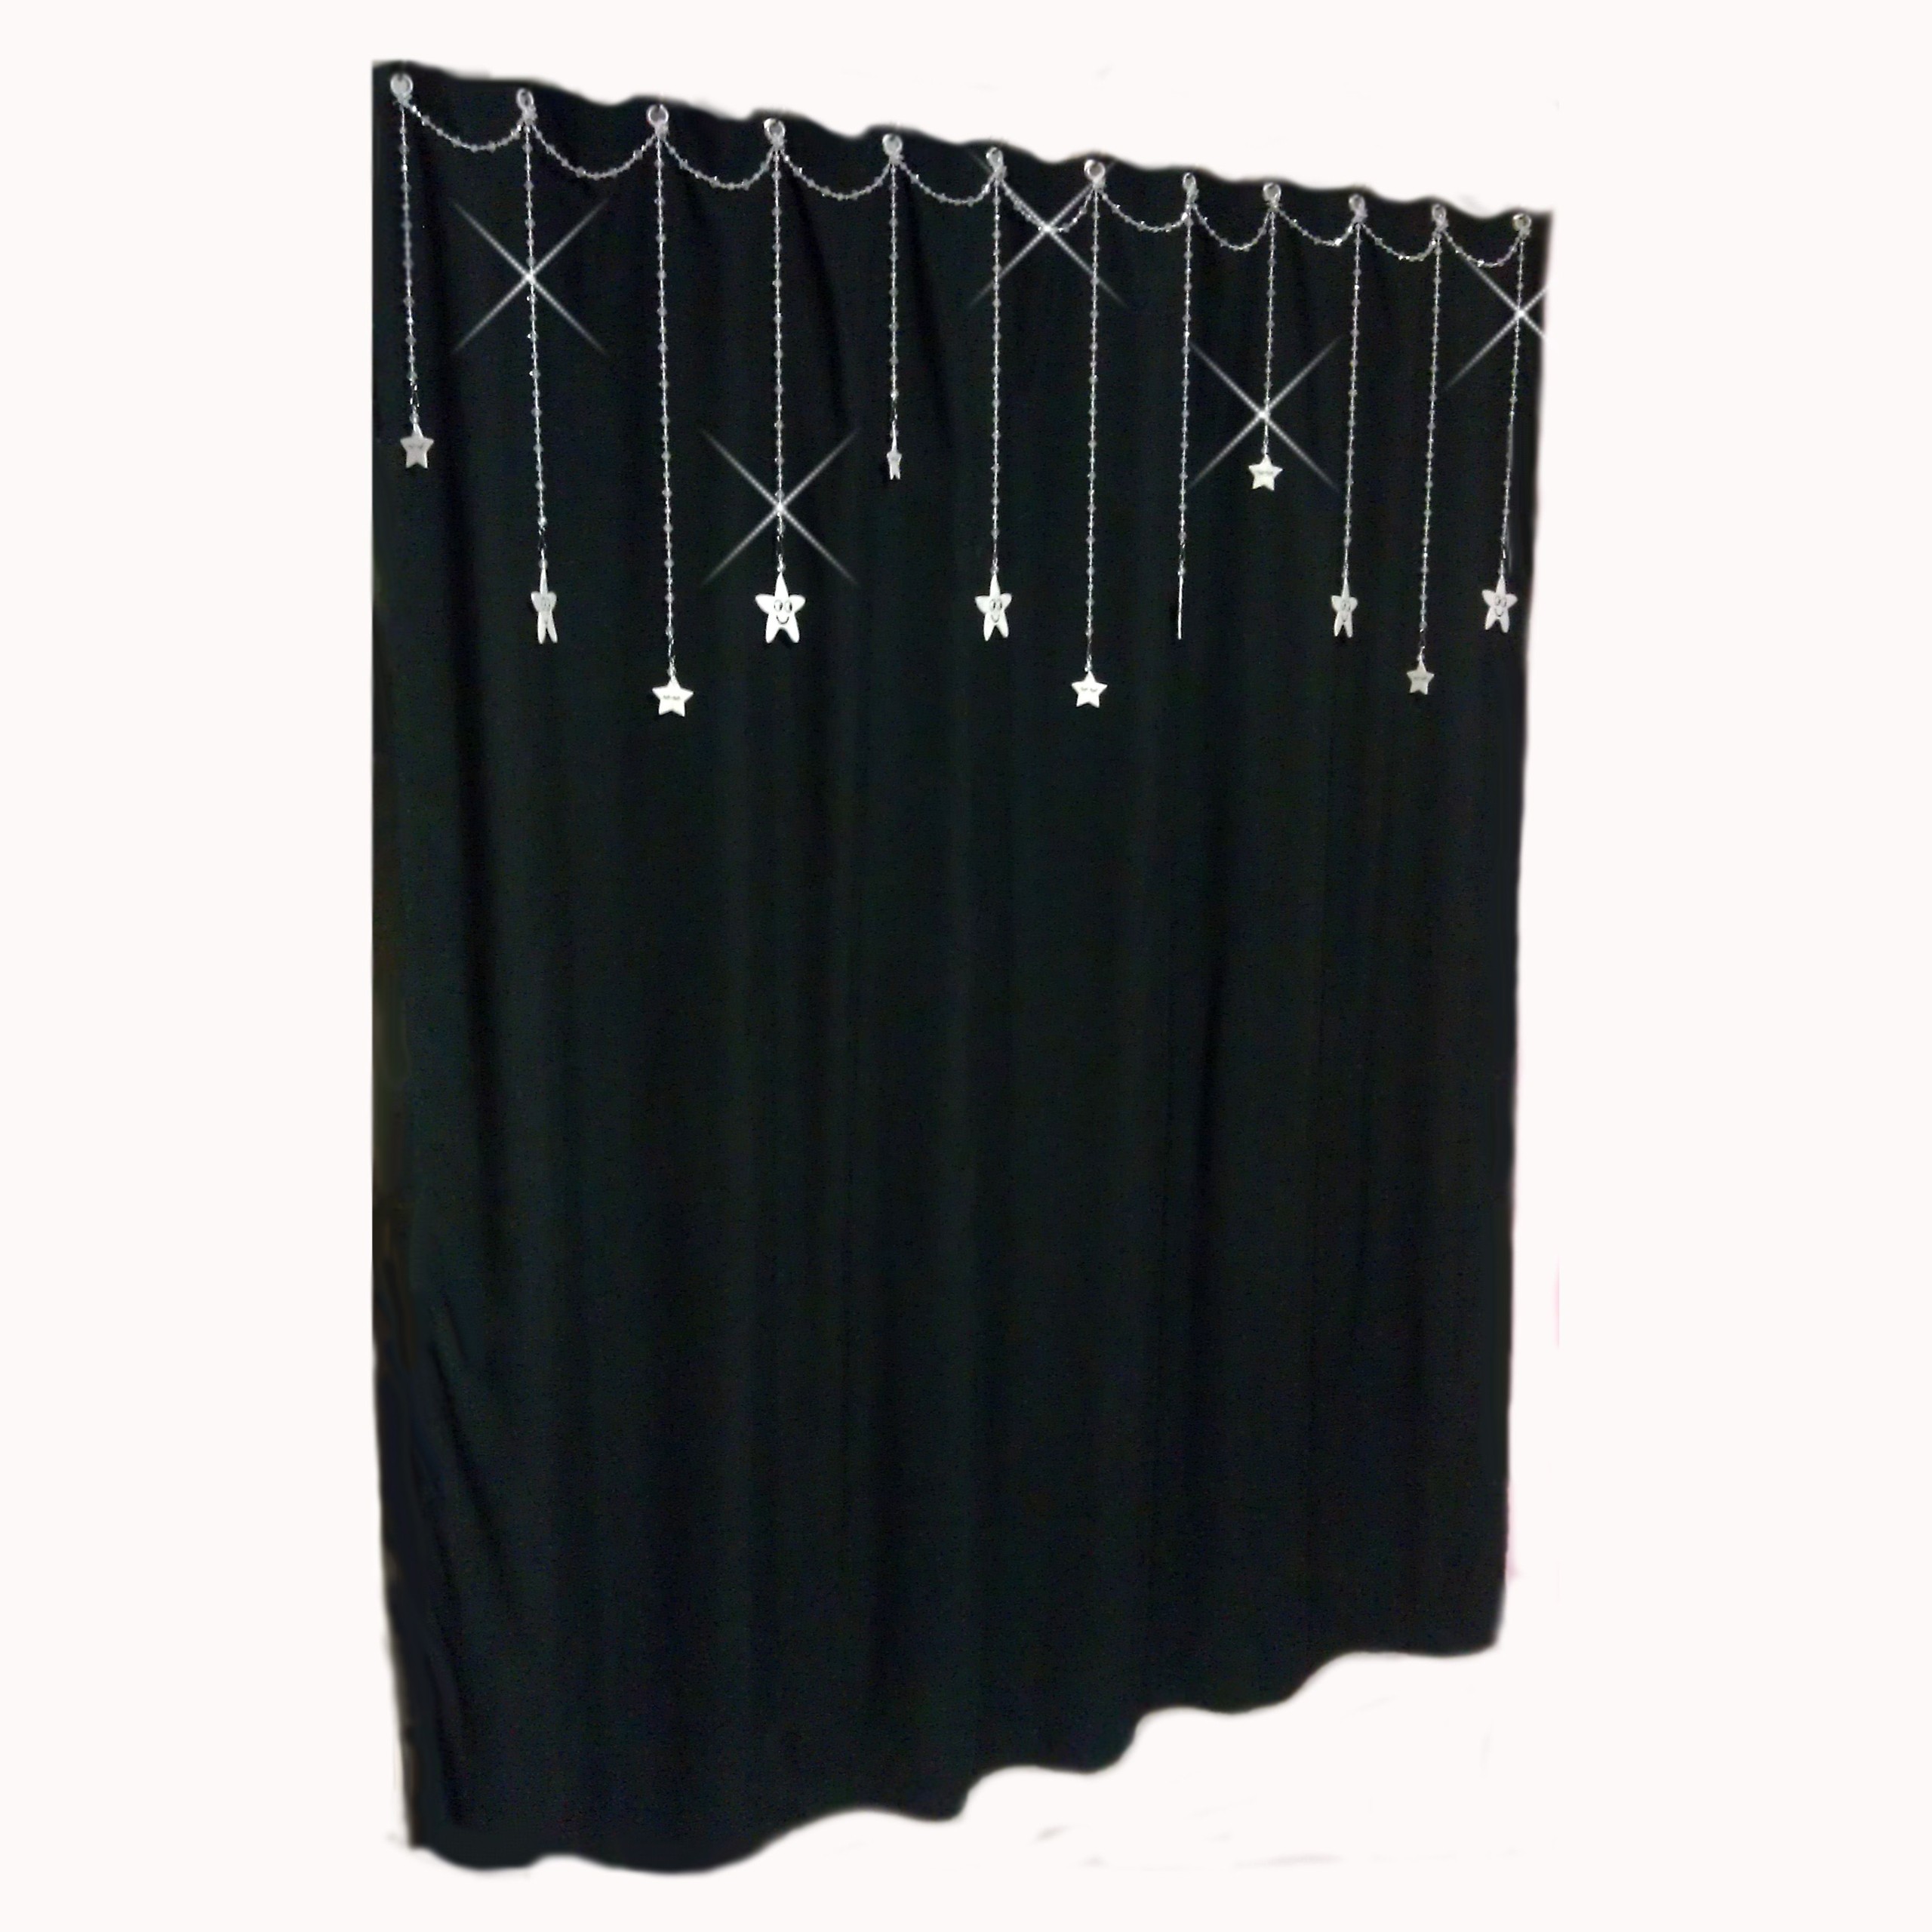 Interchangeable charms shower curtain bling base 4 shown